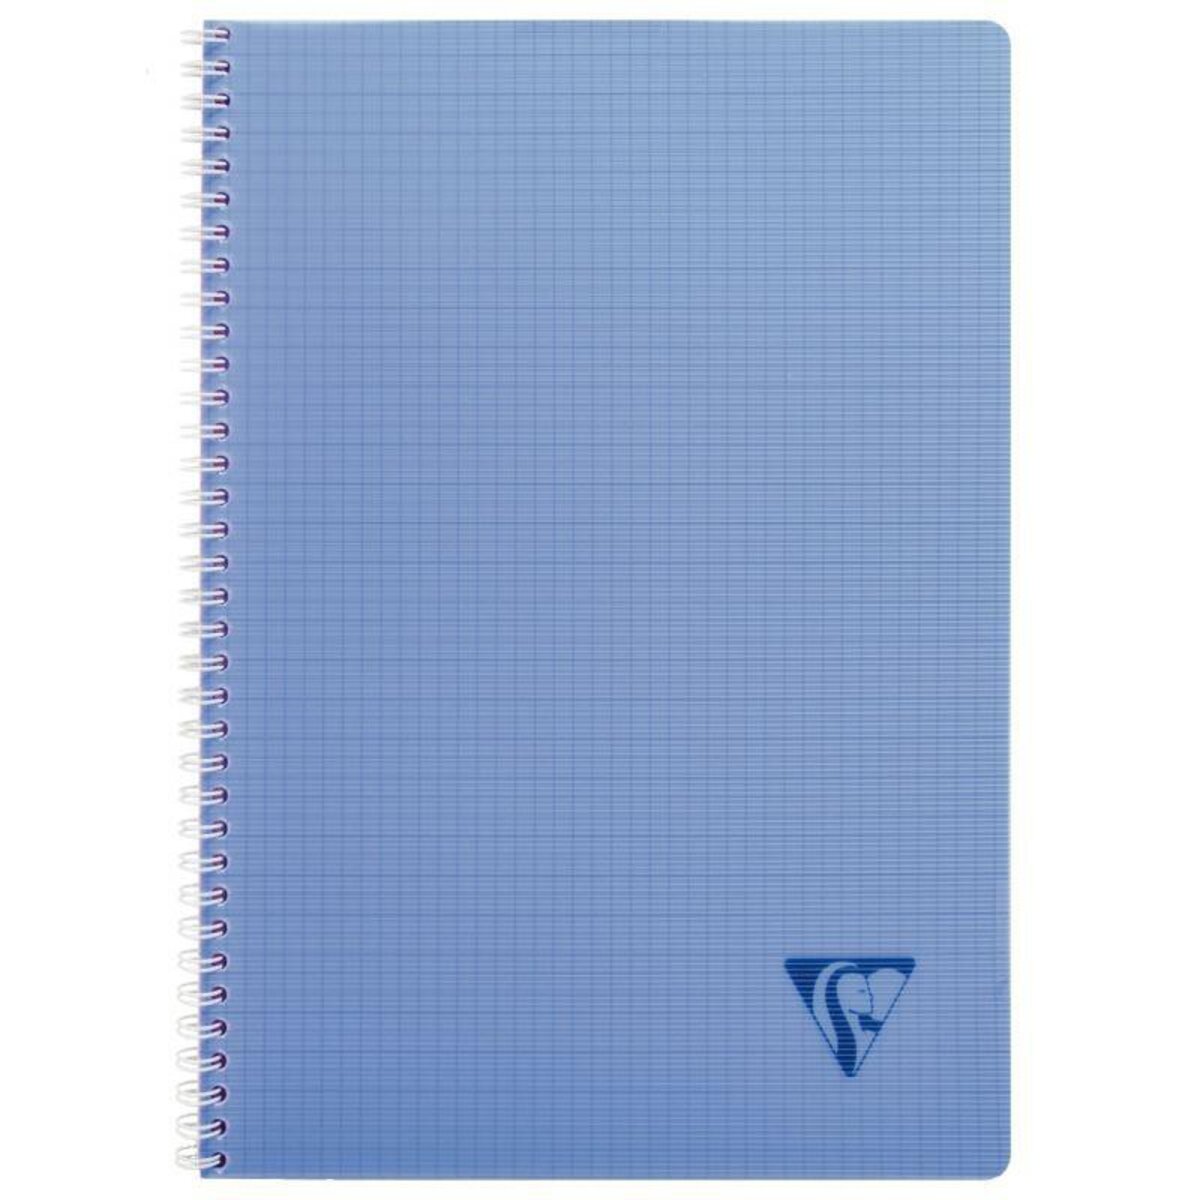 Cahier spirales Clairefontaine Linicolor - A4 21 x 29,7 cm